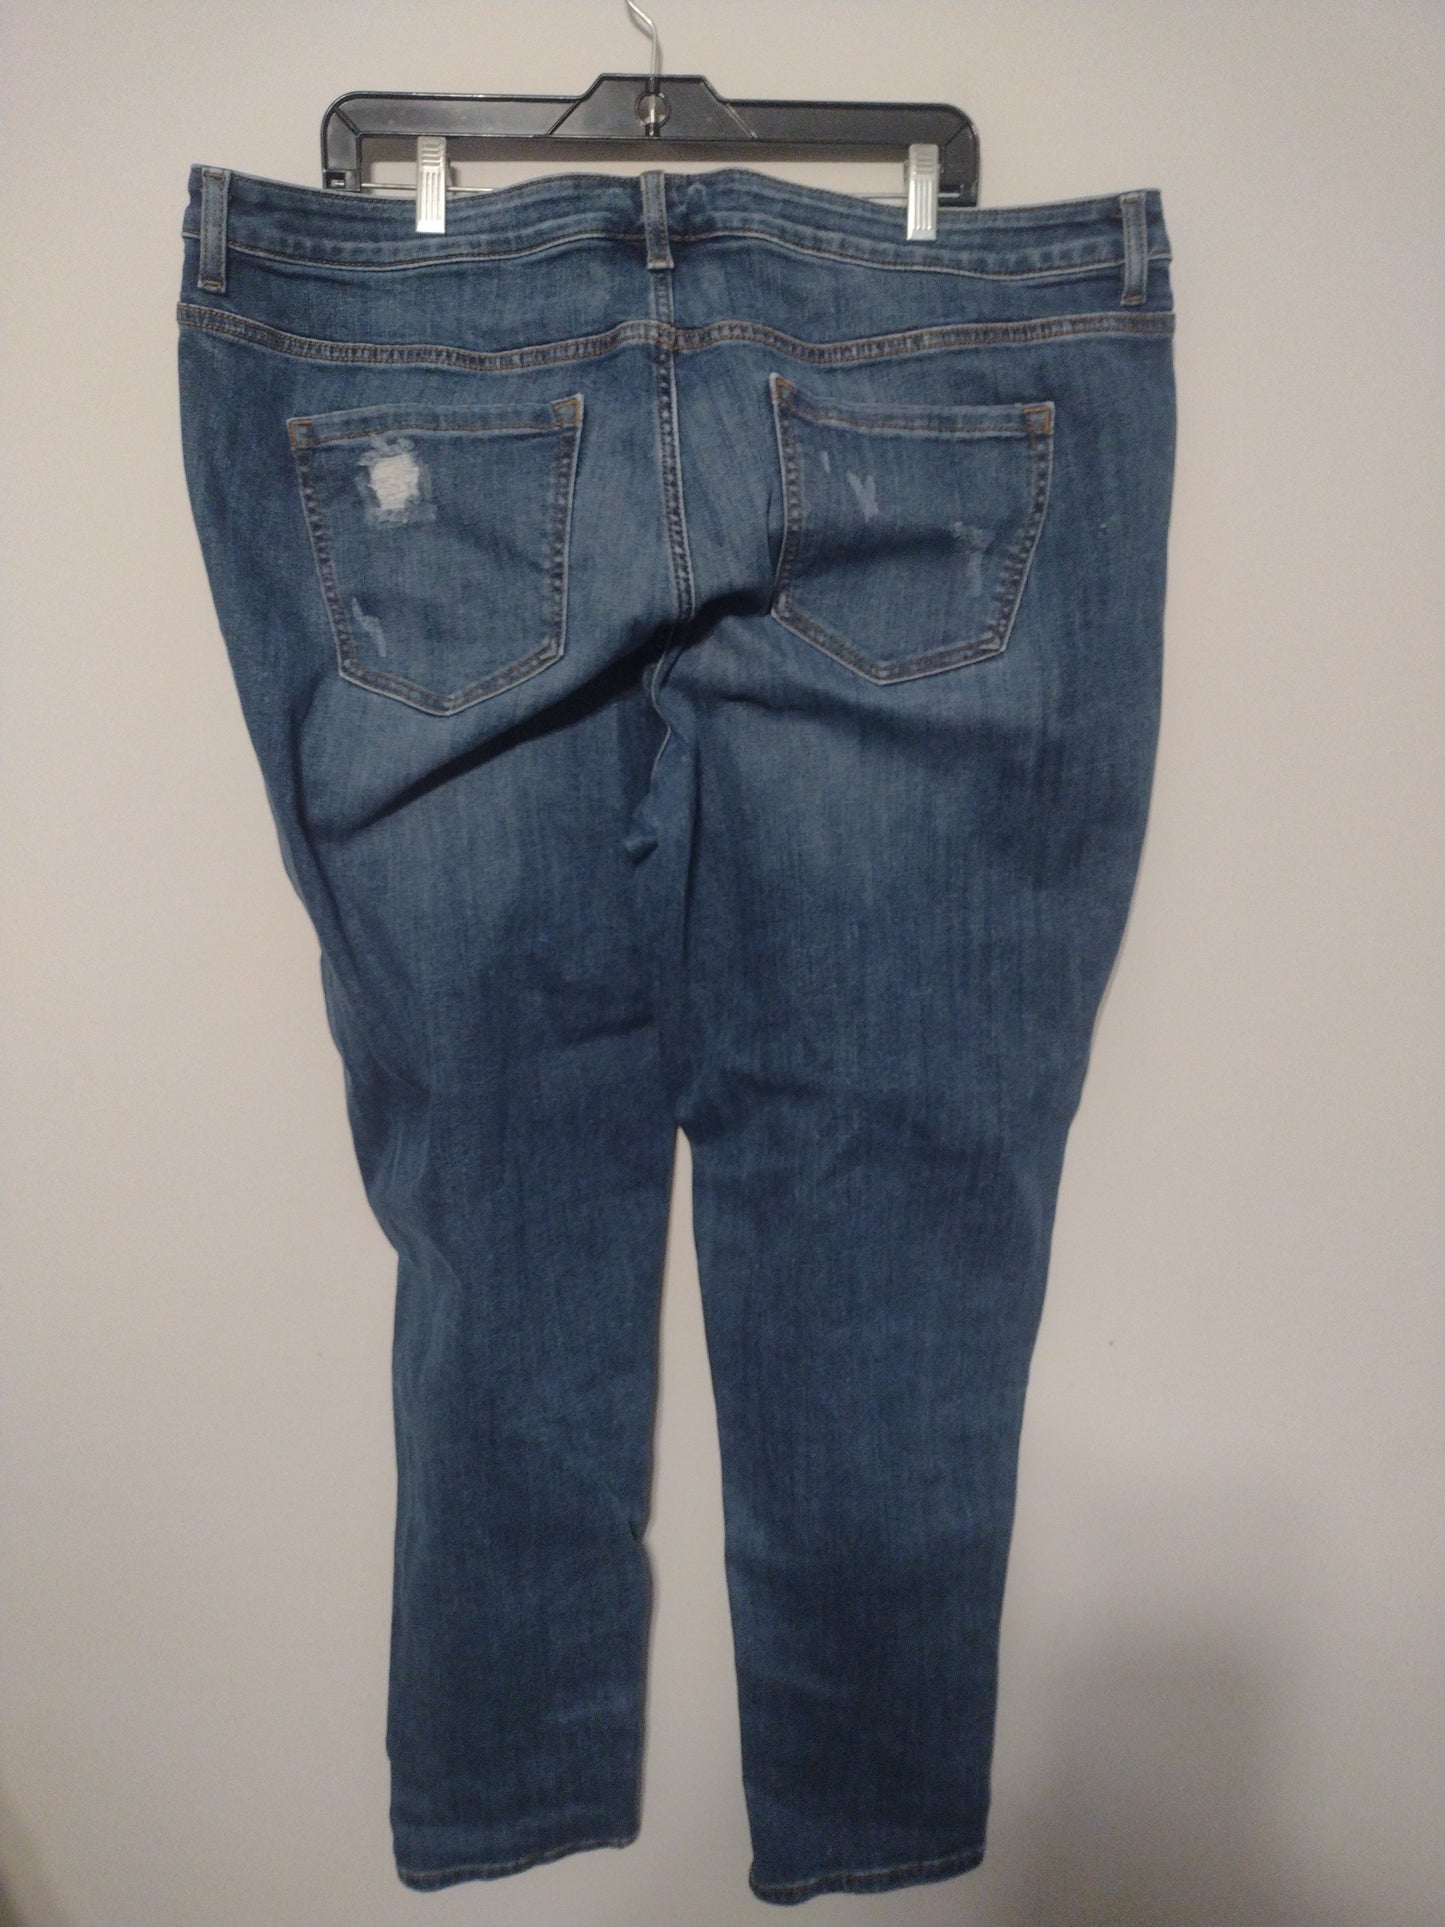 Jeans Relaxed/boyfriend By Lane Bryant  Size: 18